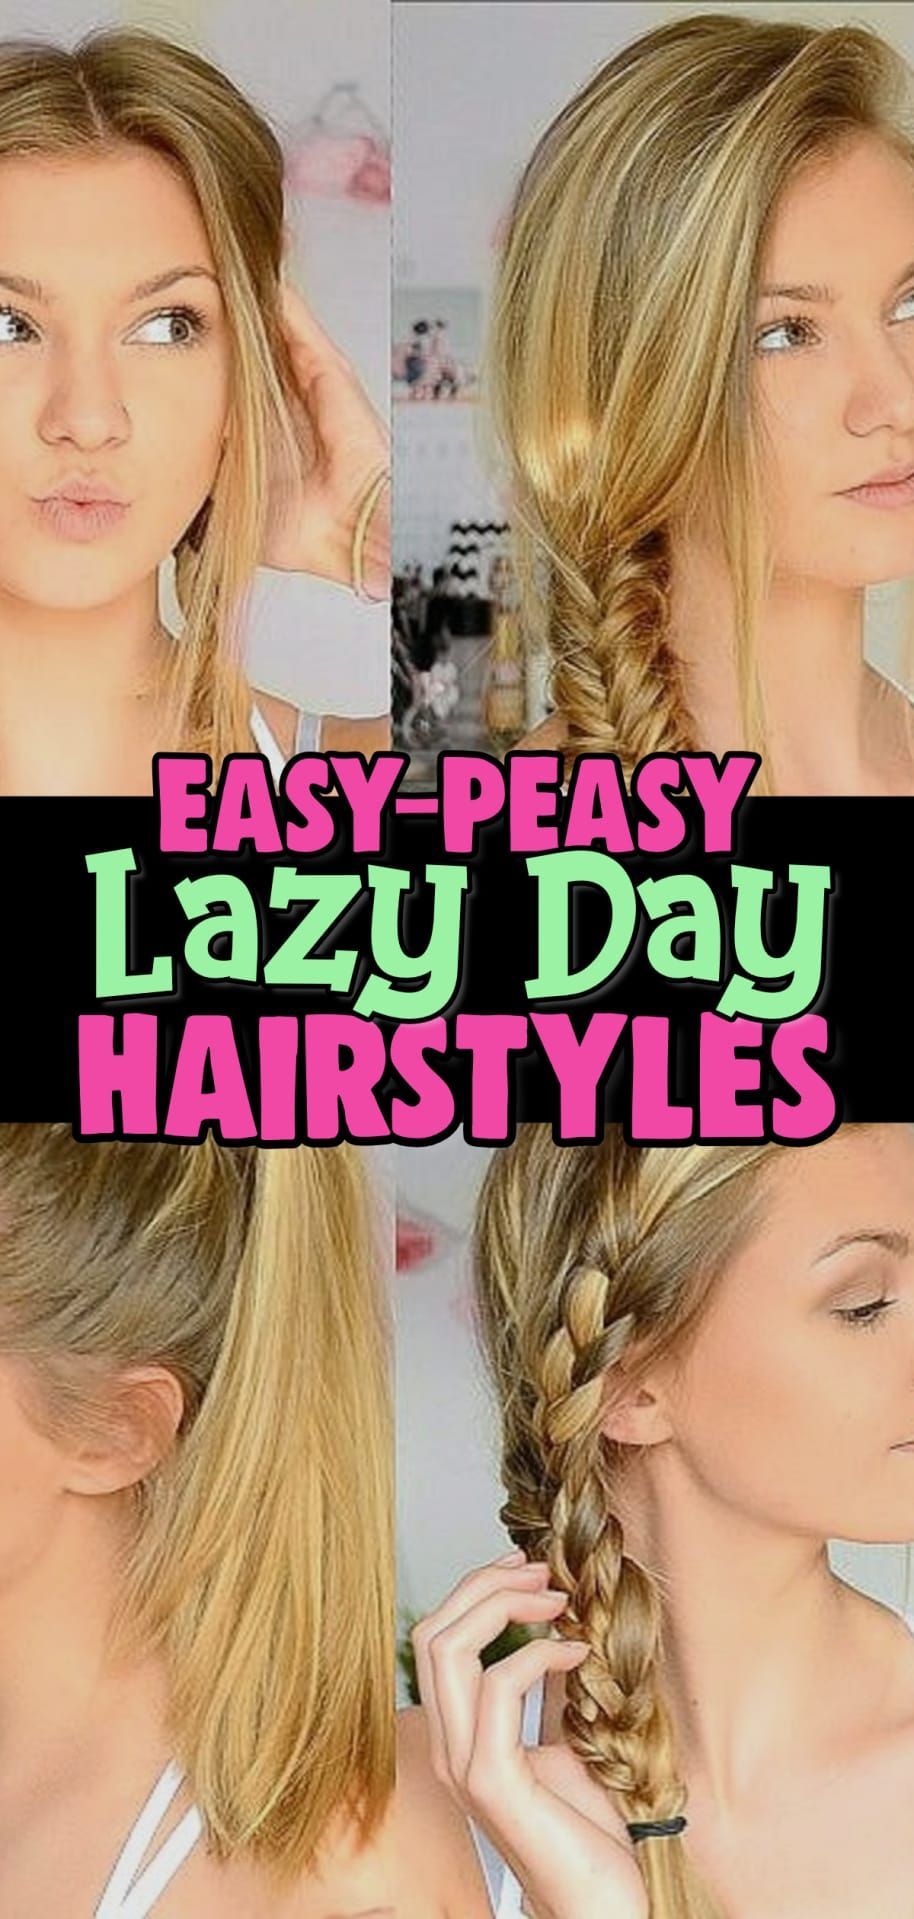 10 EASY Lazy Girl Hairstyle Ideas {Step By Step Video Tutorials For Lazy Day Running Late Quick Hairstyles} -   15 hairstyles Everyday lazy girl ideas